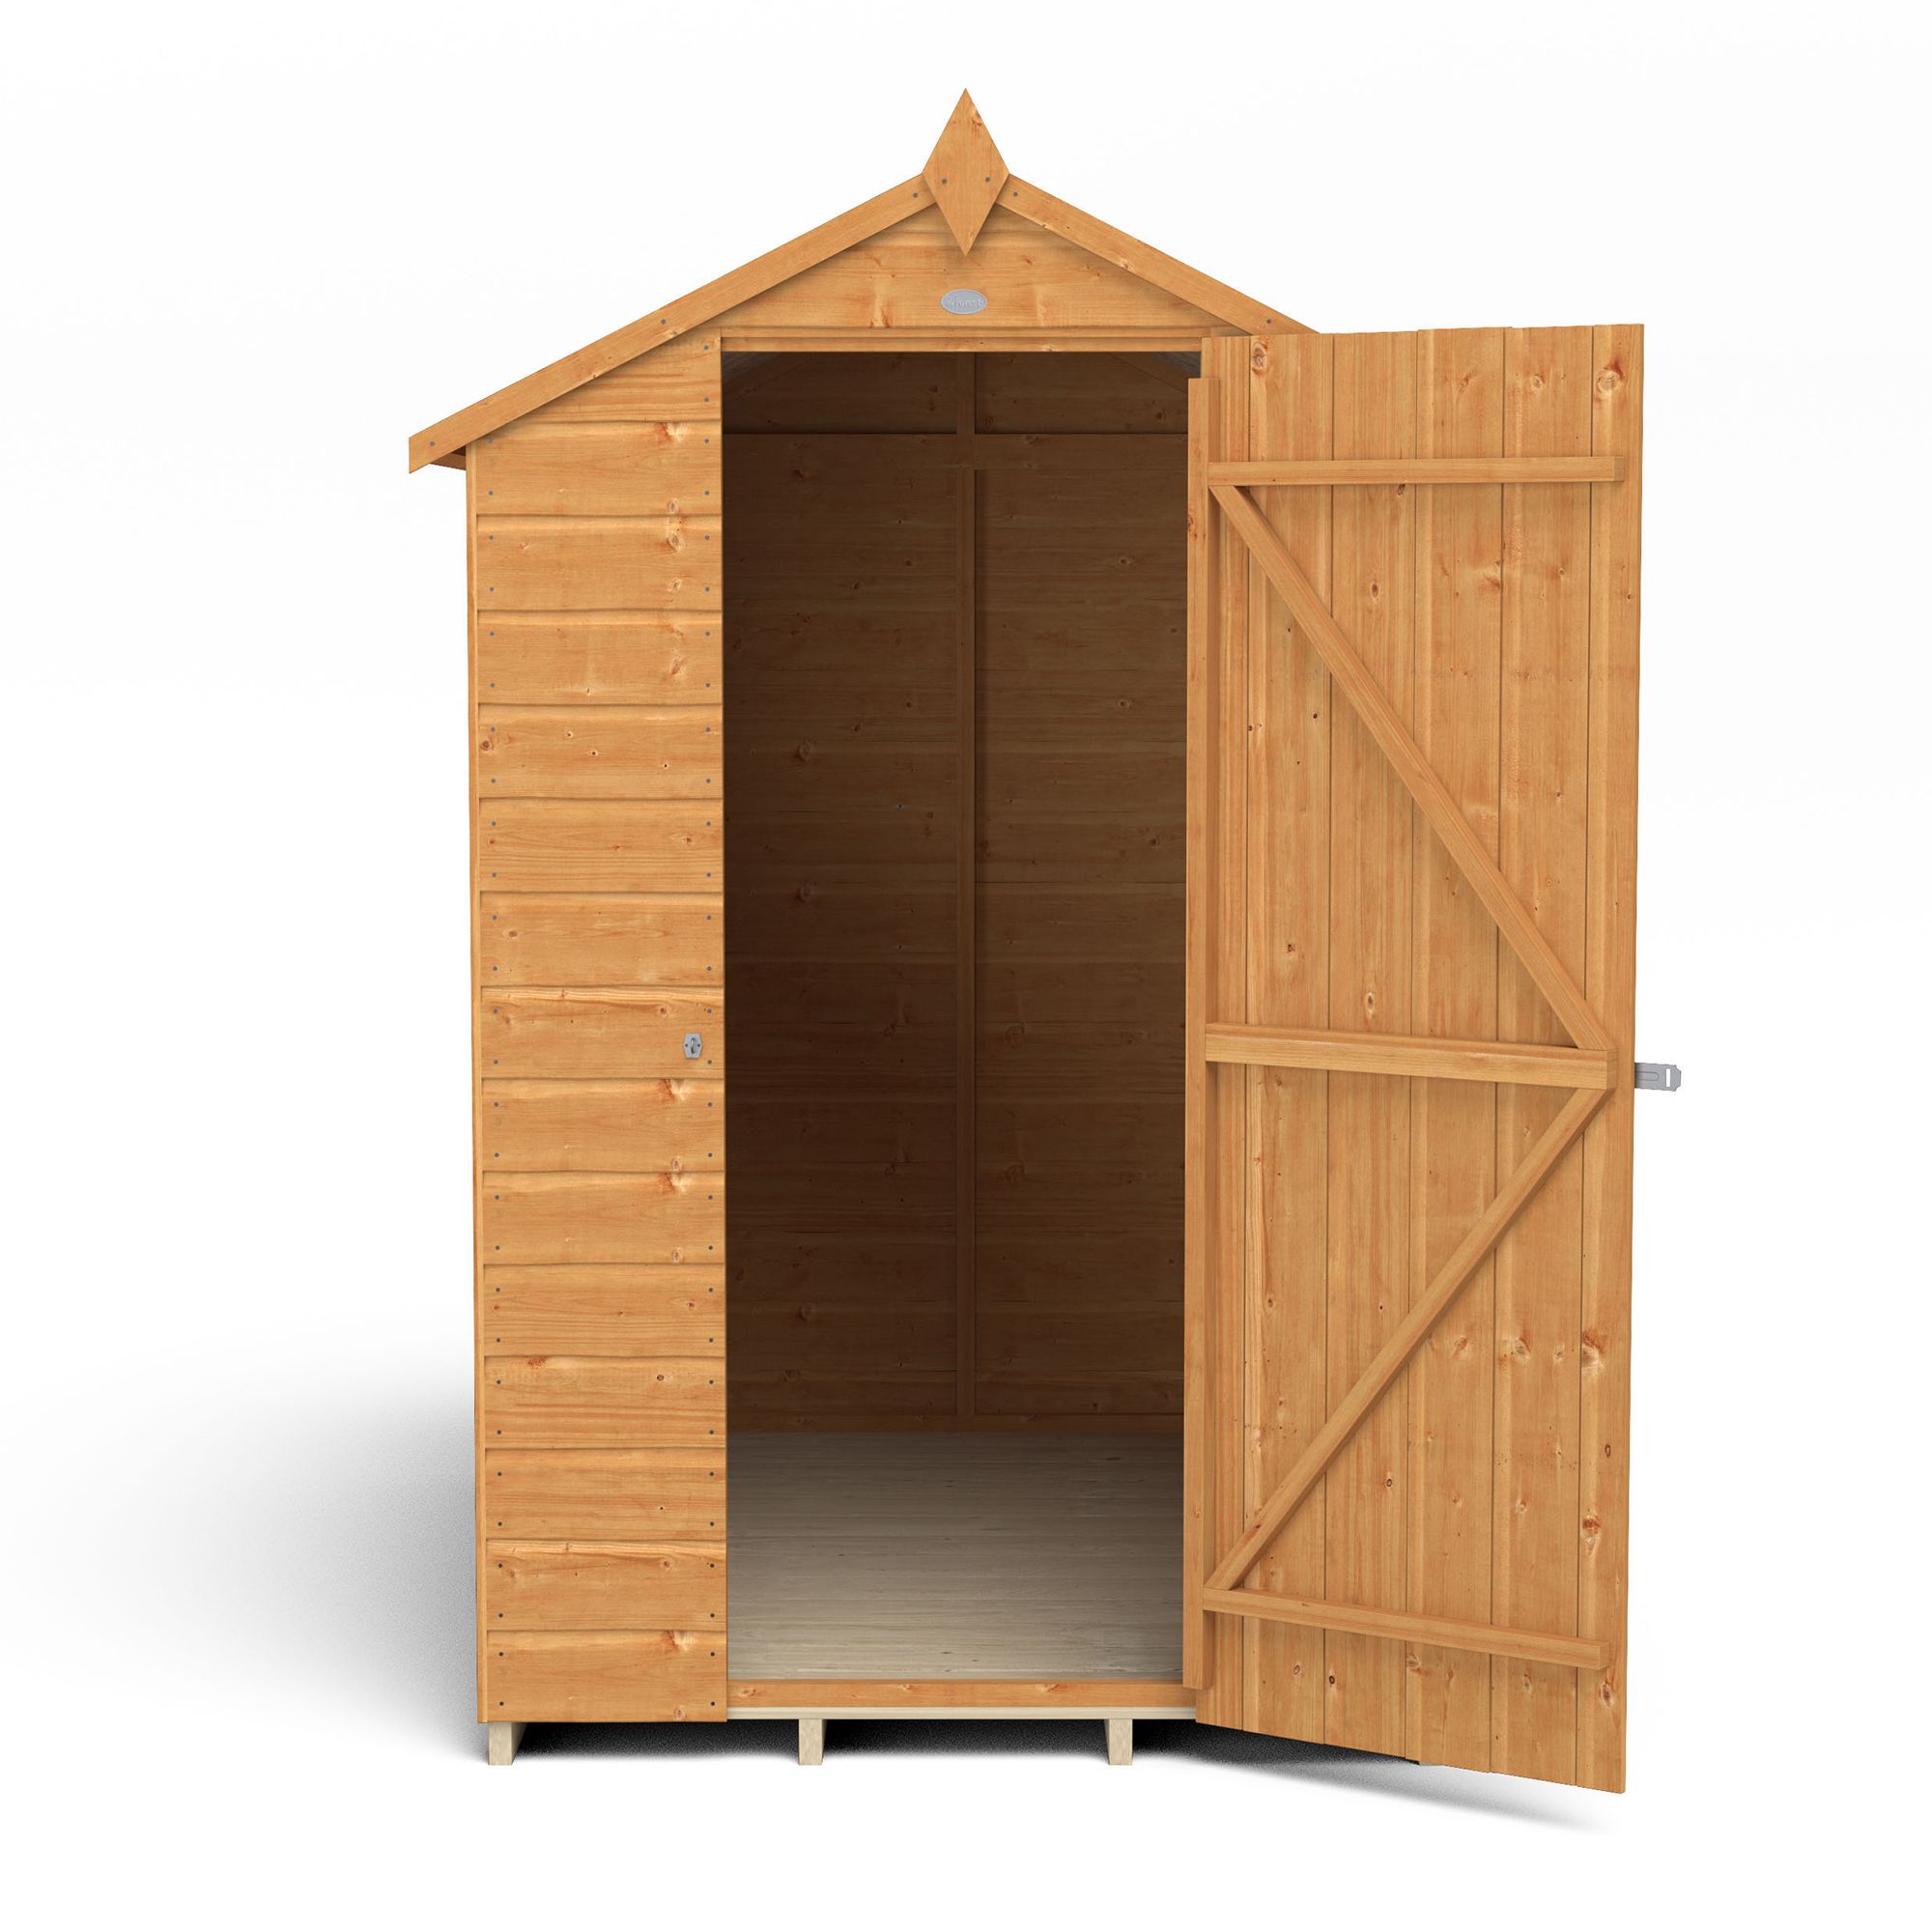 Forest Garden Shiplap 6x4 ft Apex Wooden Shed with floor & 1 window (Base included) - Assembly service included